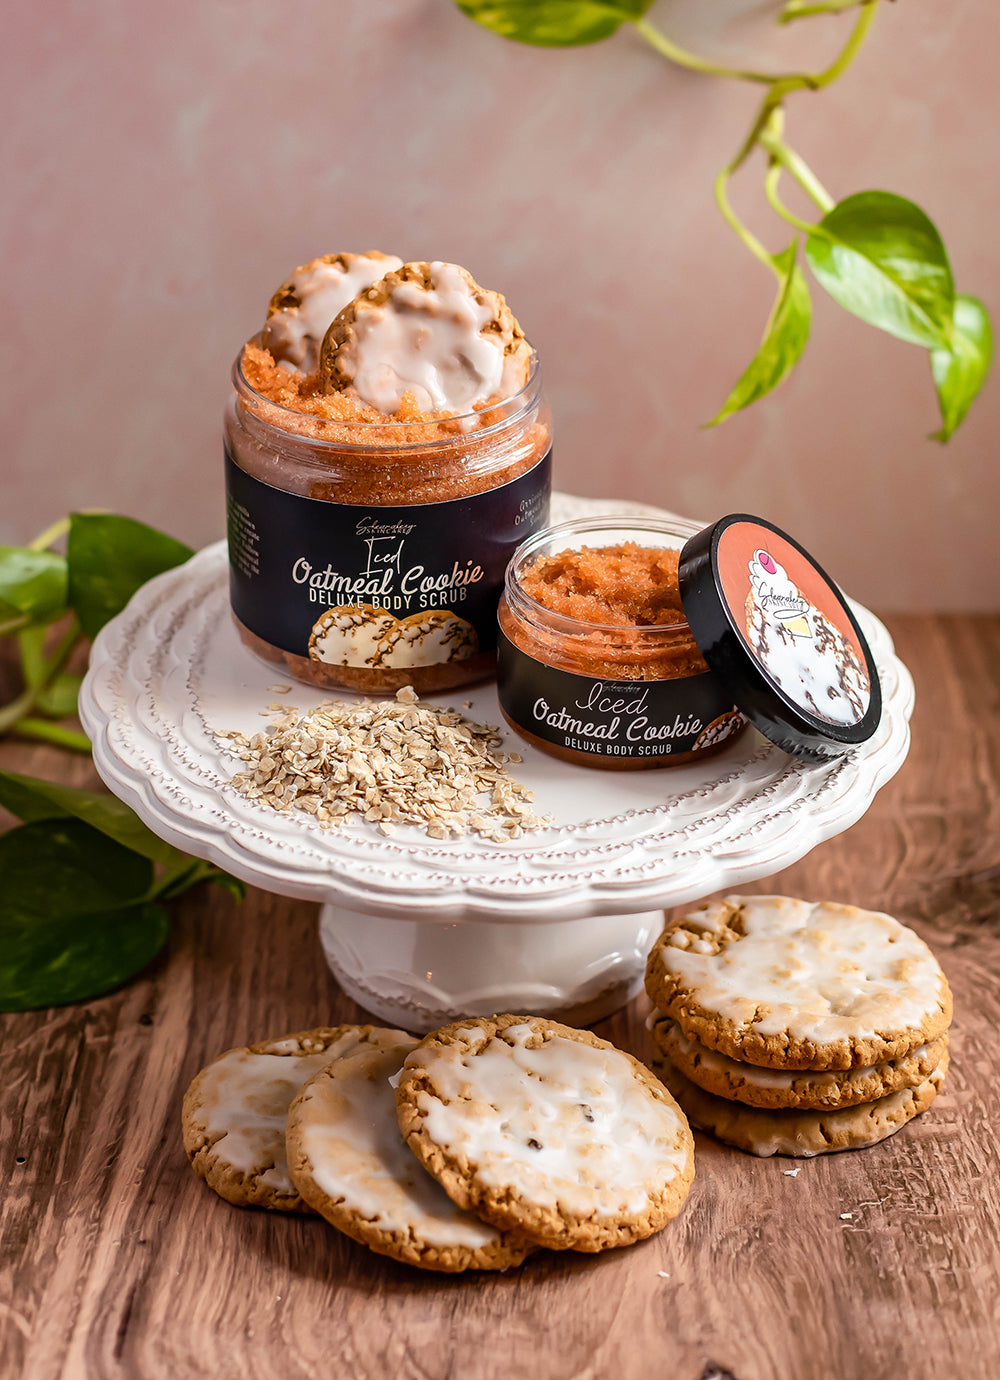 Iced Oatmeal Cookie Deluxe Body Scrub